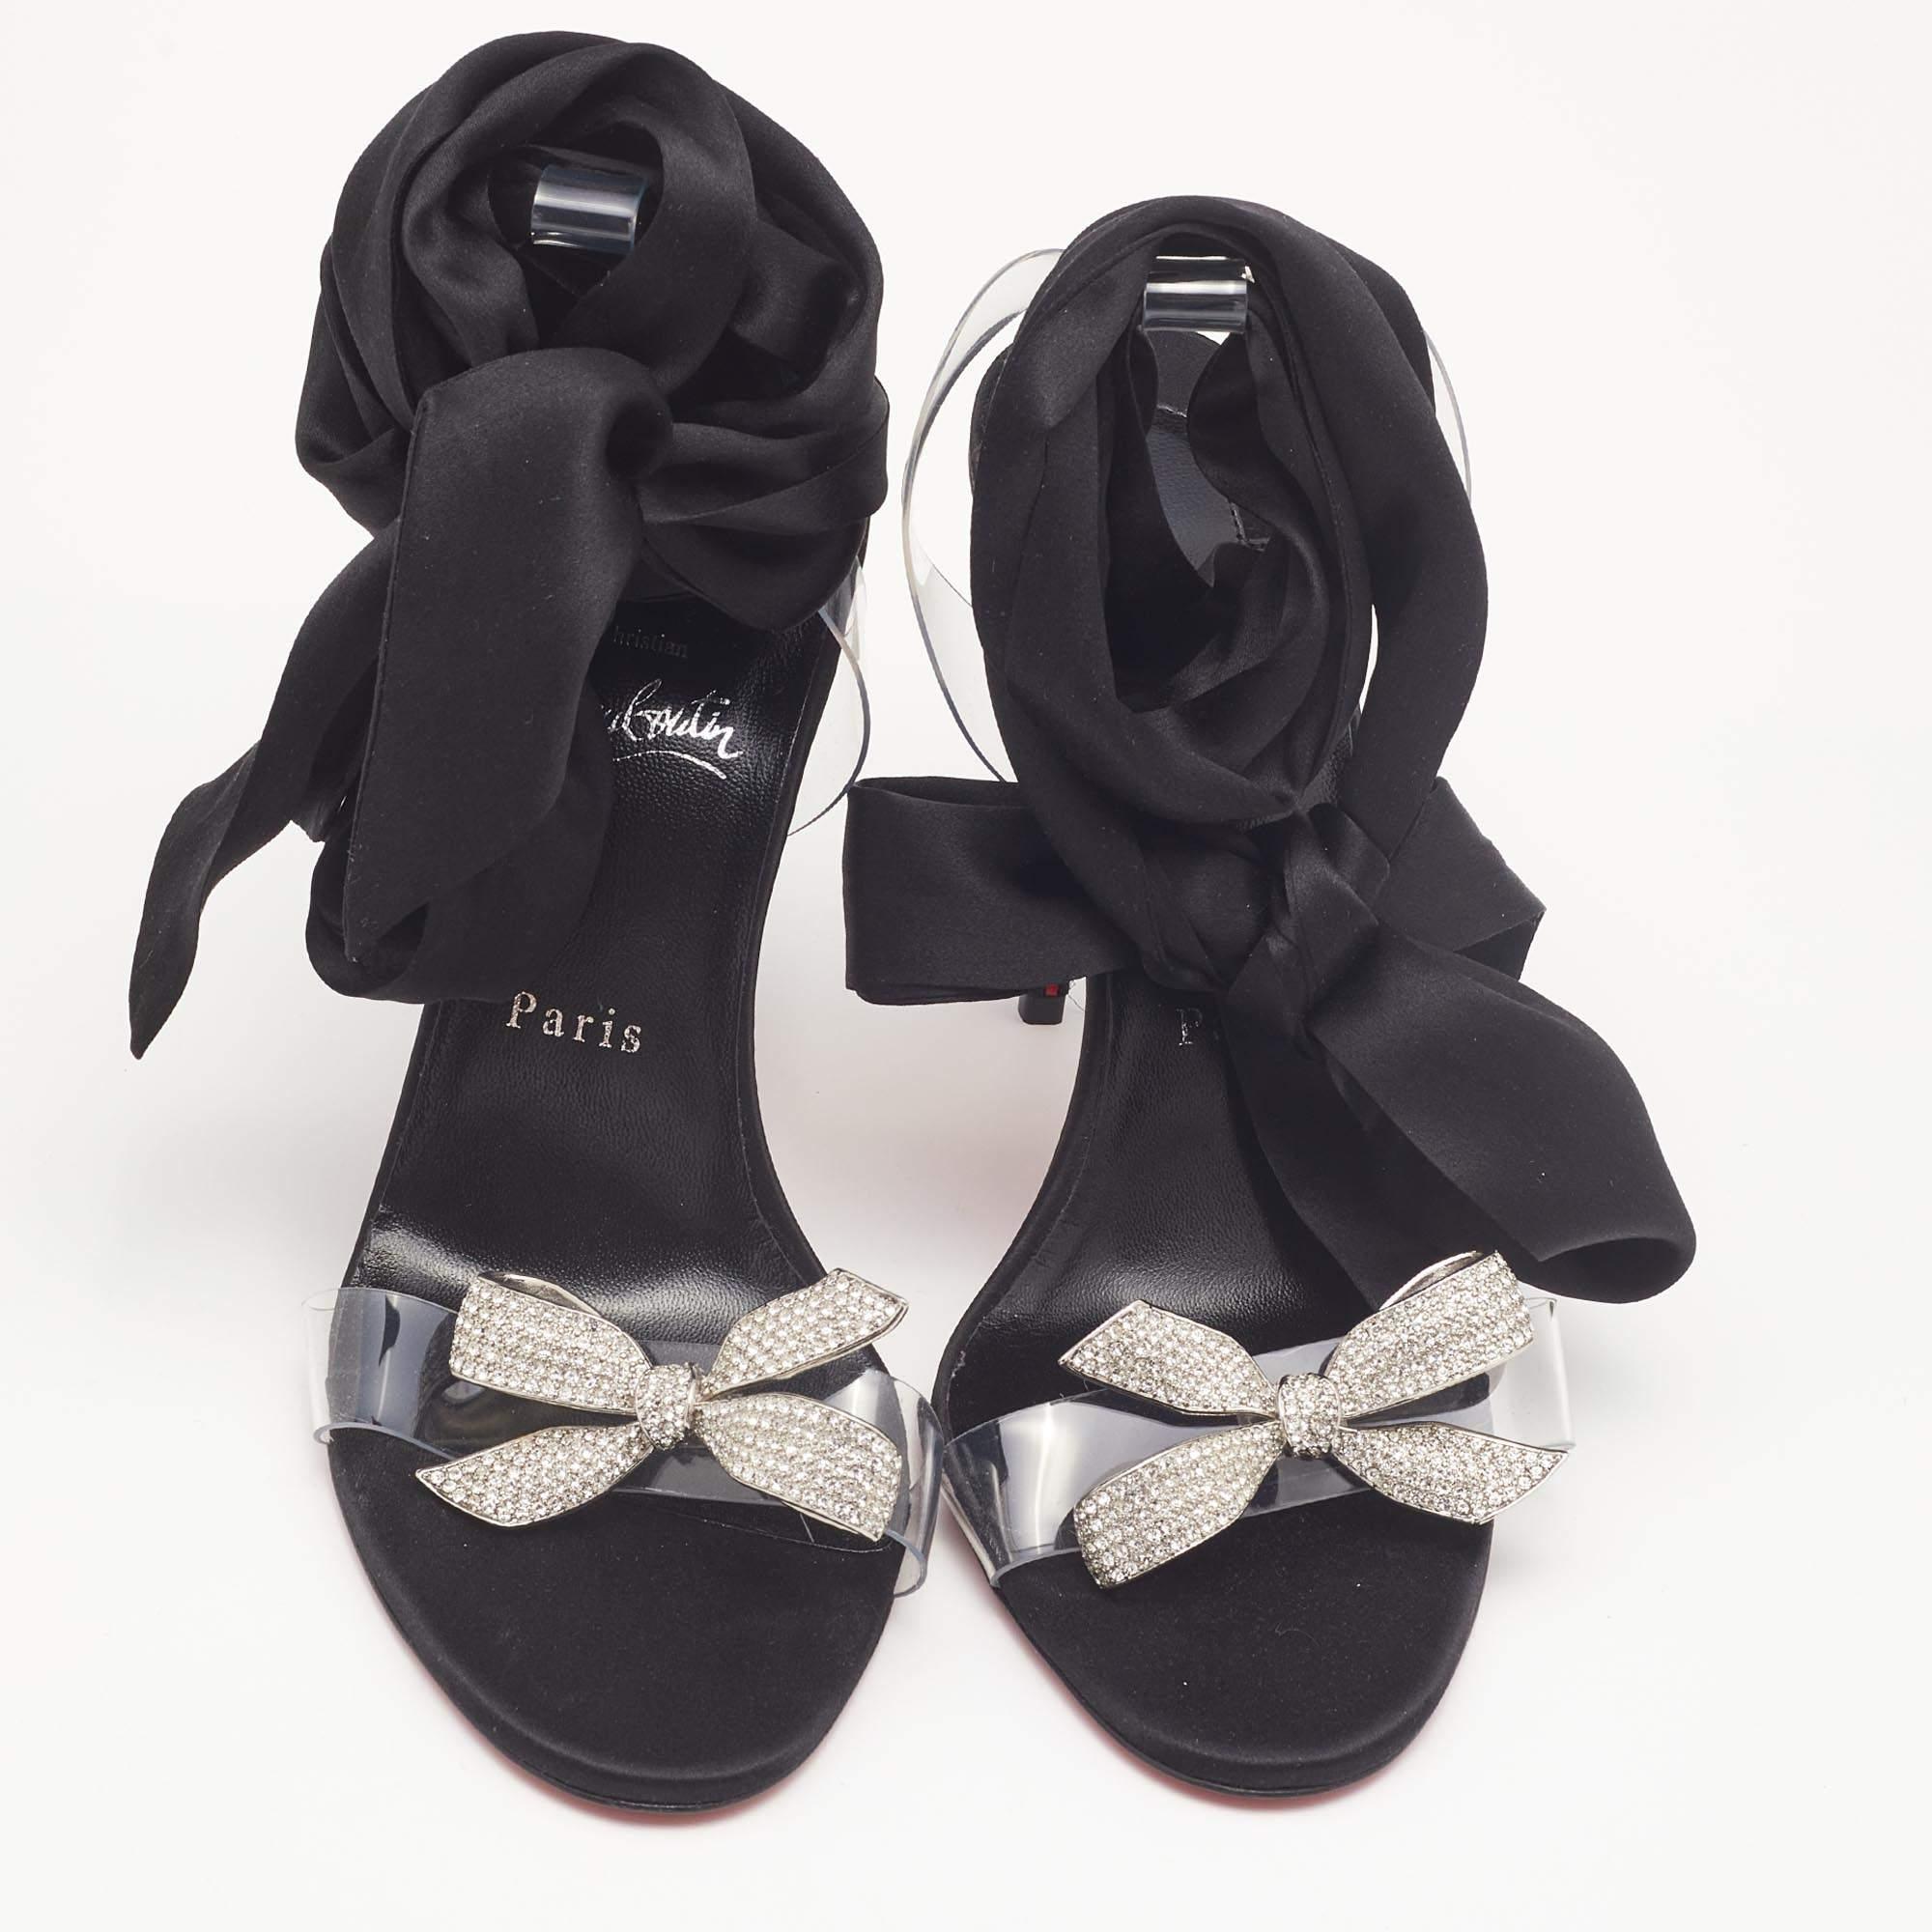 These sandals will frame your feet in an elegant manner. Crafted from quality materials, they flaunt a classy display, comfortable insoles & durable heels.

Includes: Original Box, Extra Heel Tips

